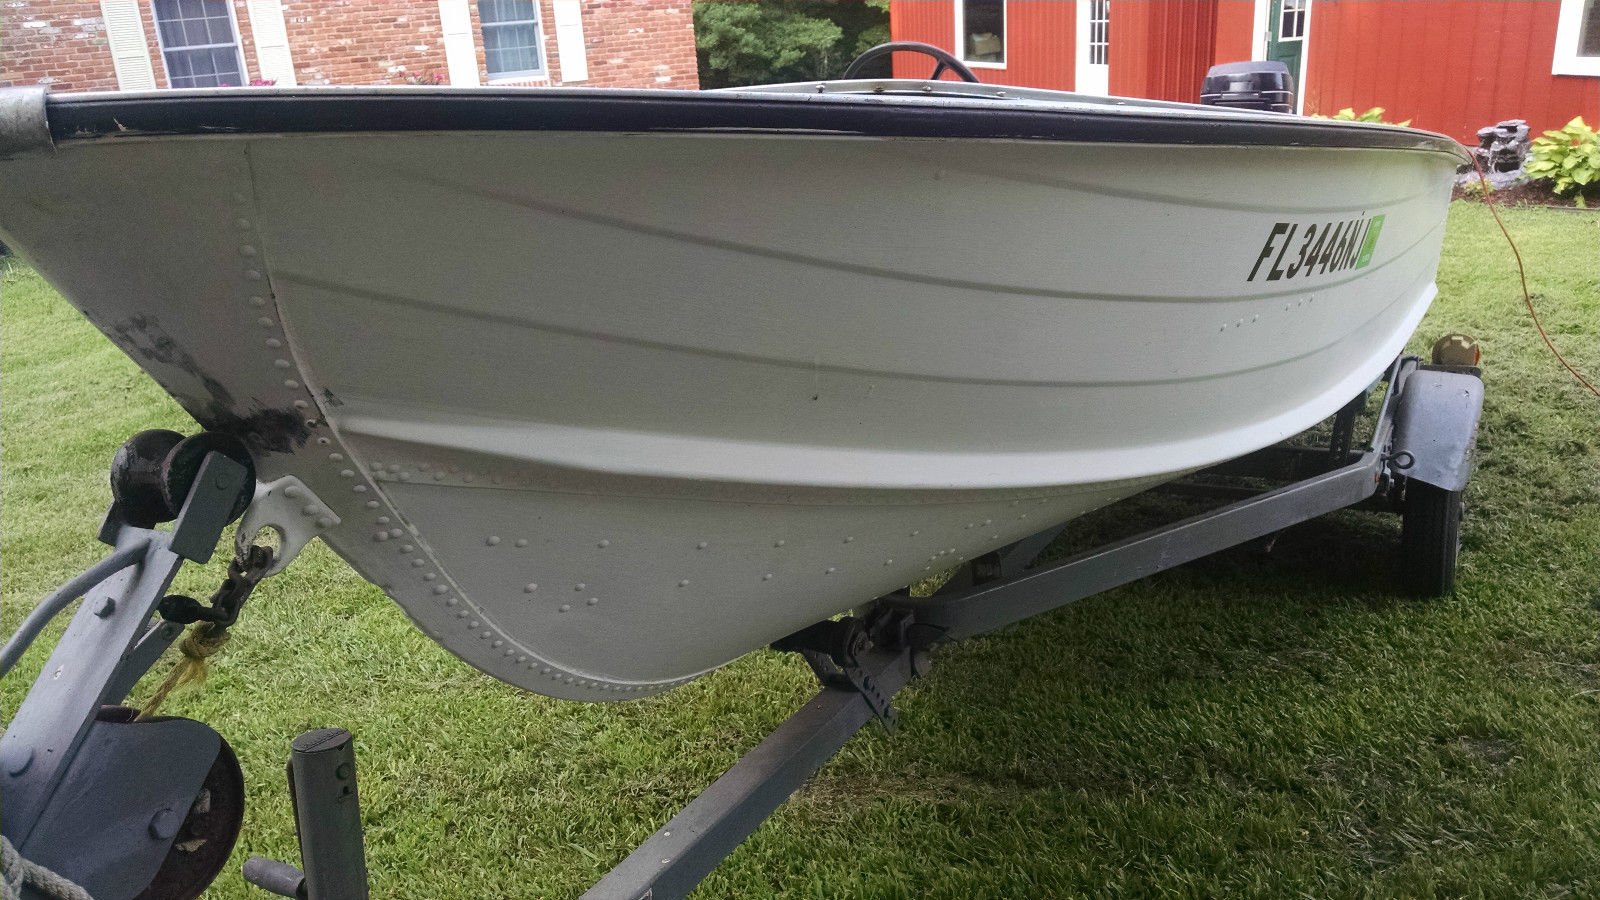 Starcraft 1973 for sale for $2,100 - Boats-from-USA.com